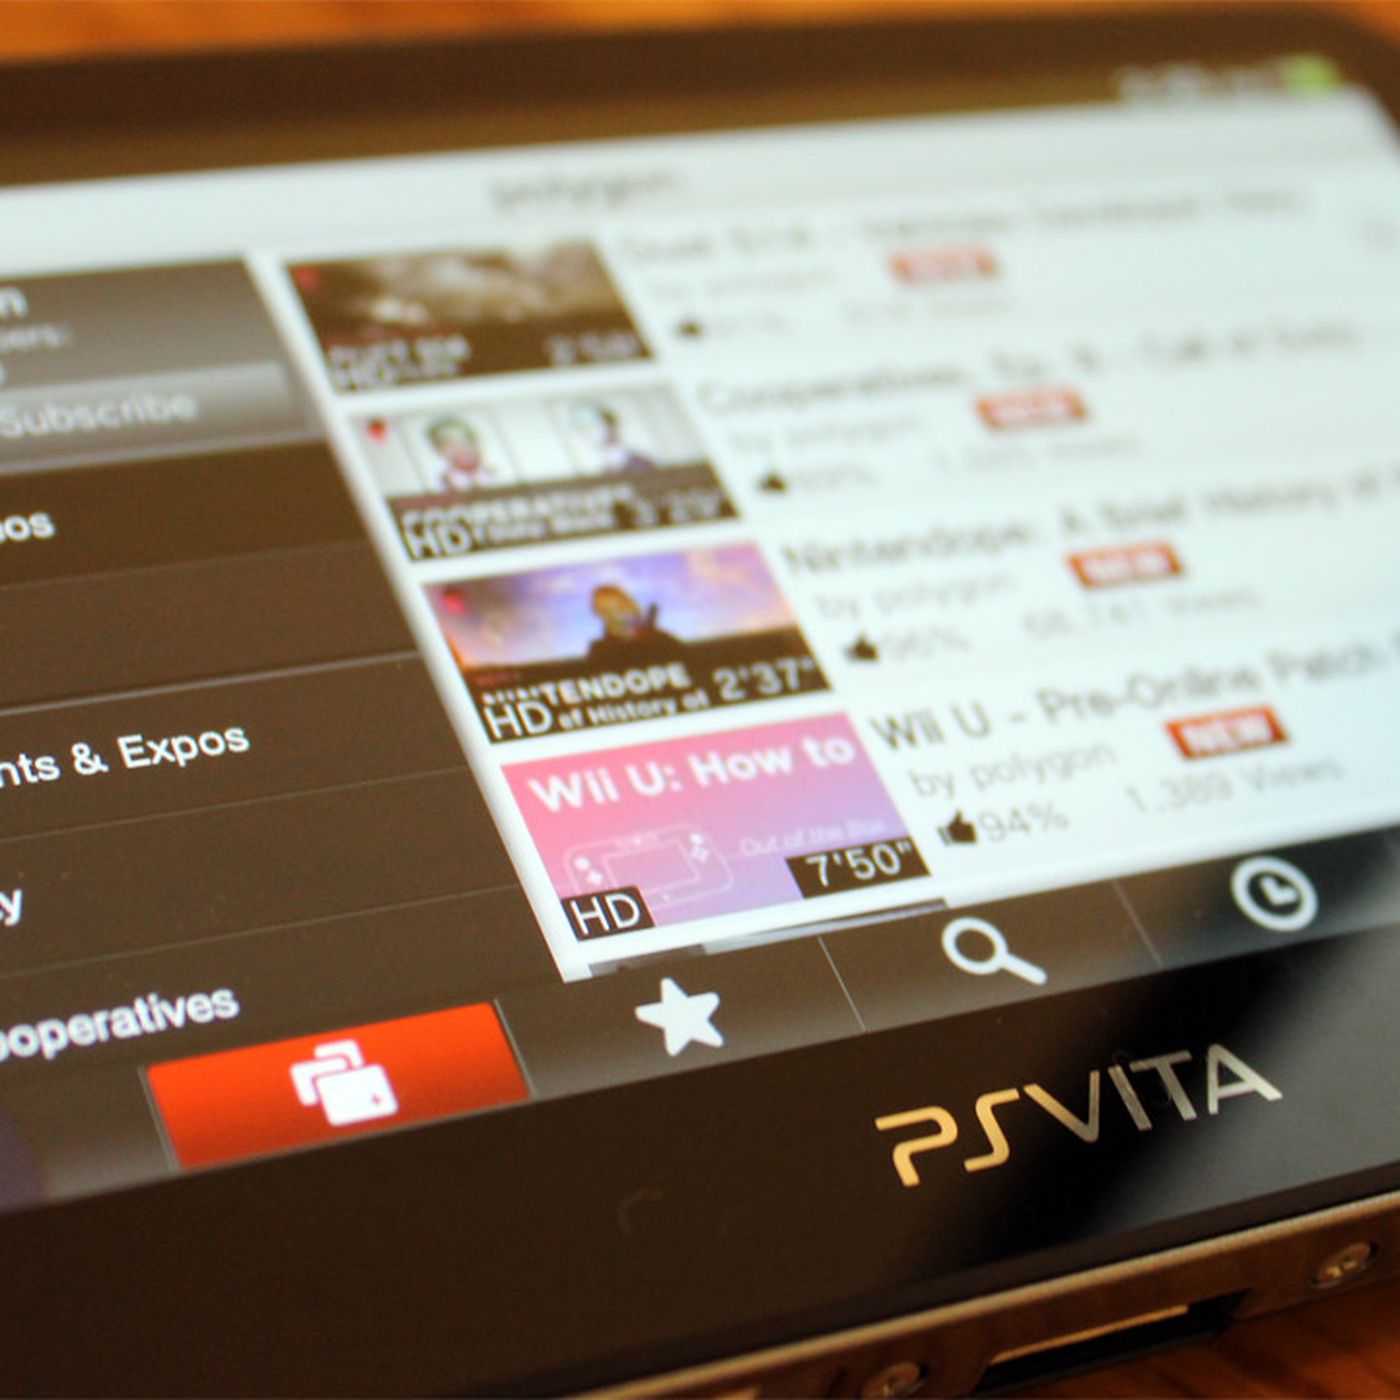 Ps Vita Youtube App Updated With Channels Playlists Social Features And More Polygon